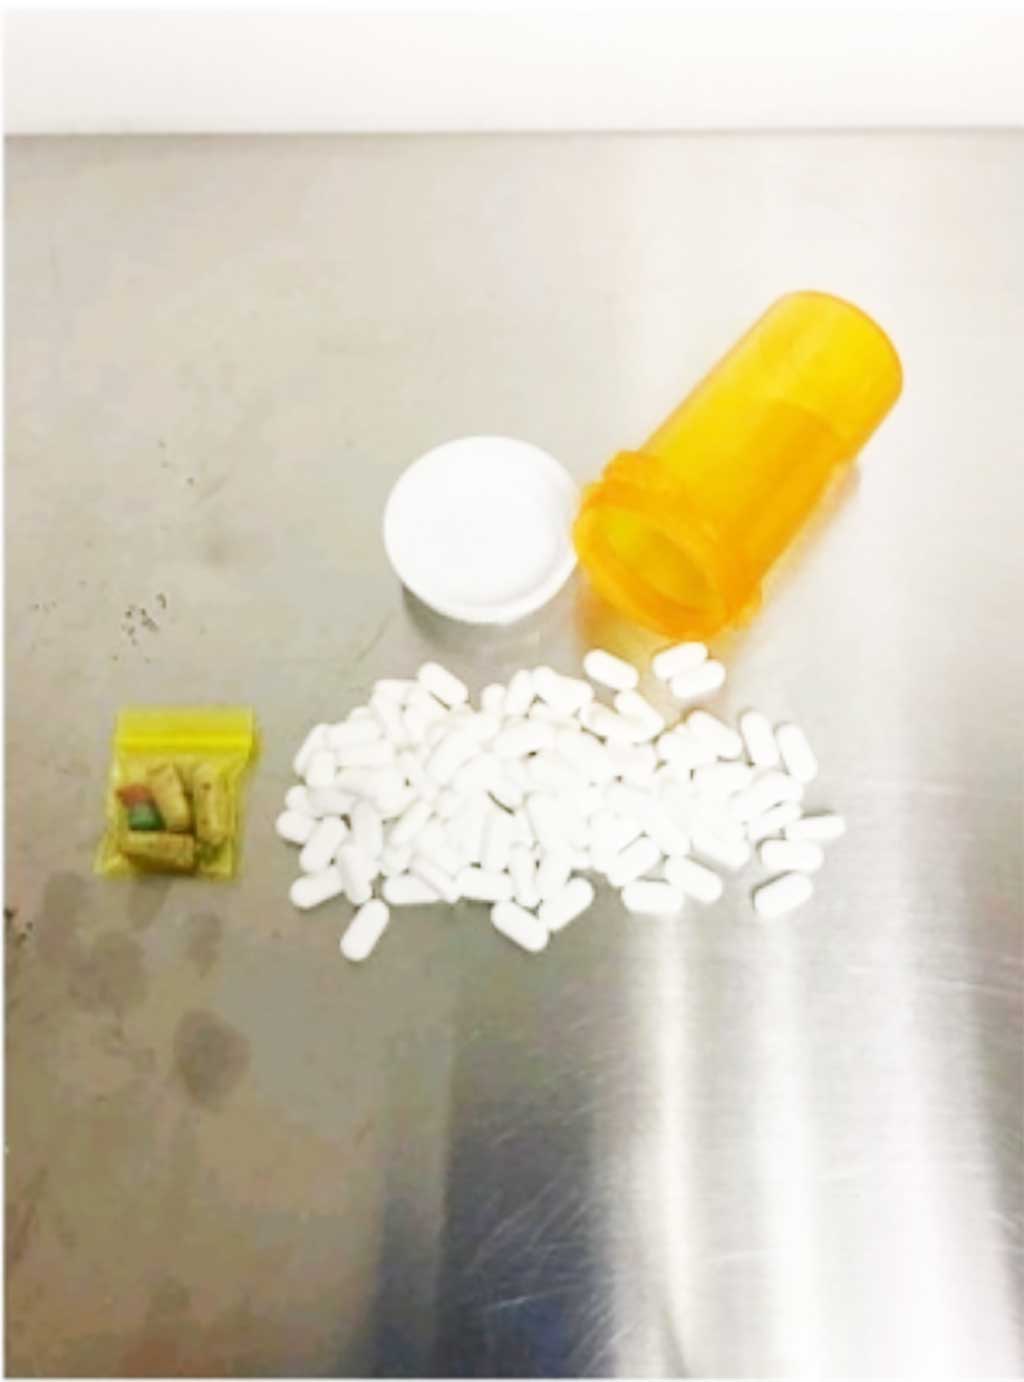 Drugs confiscated by Miami Springs Police